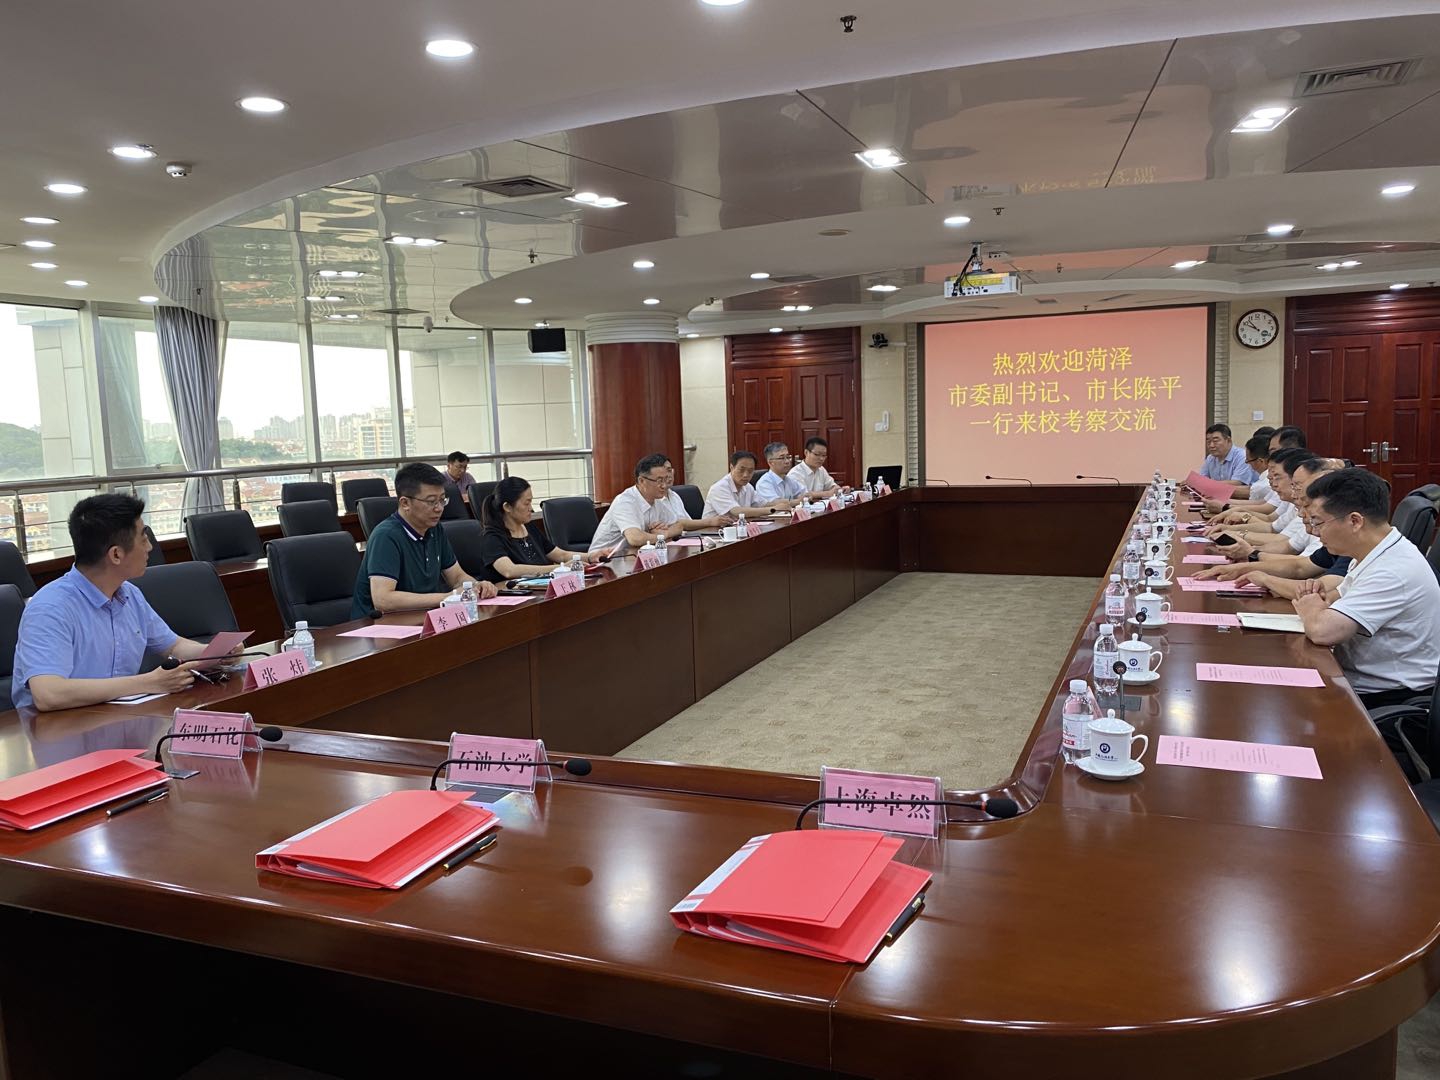 Shanghai SupeZET, Dongming Petrochemical and China University of Petroleum signed the License Agreement for Industrial Test and Promotion of Catalytic Cracking of Crude Oil to Ethylene Propylene (UPC) Technology